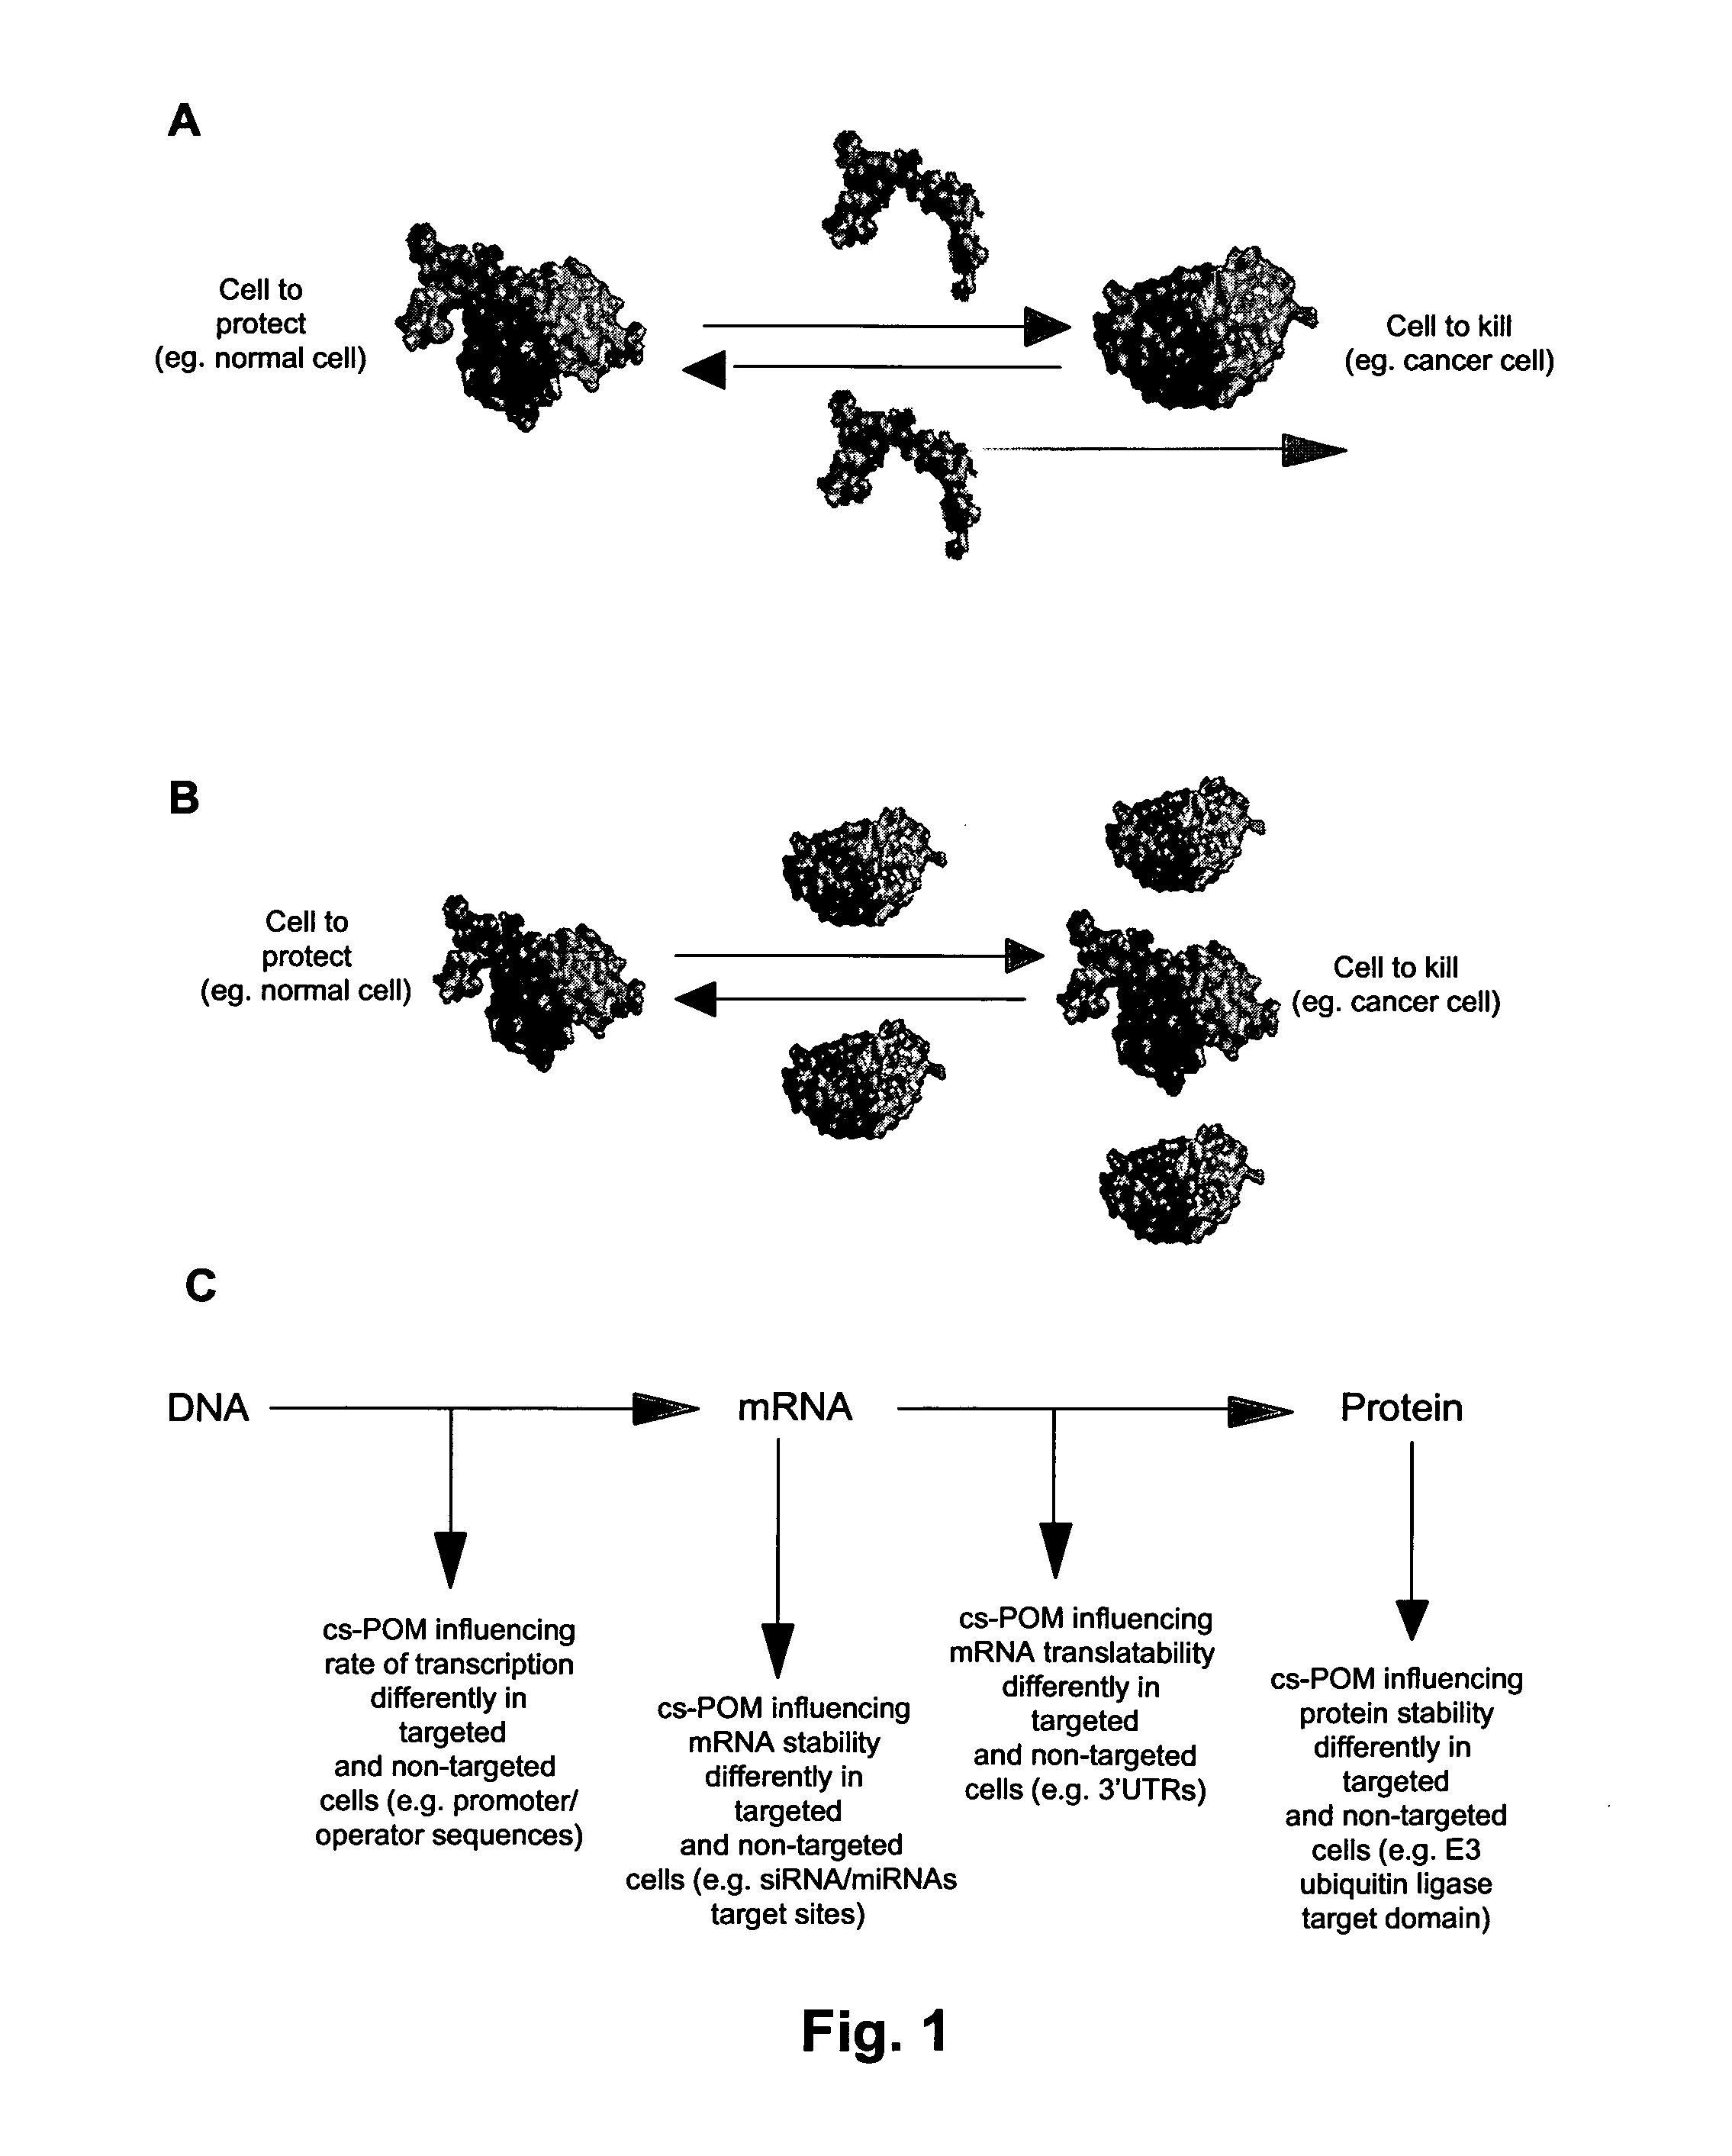 Systems and methods for diminishing cell growth and inducing selective killing of target cells